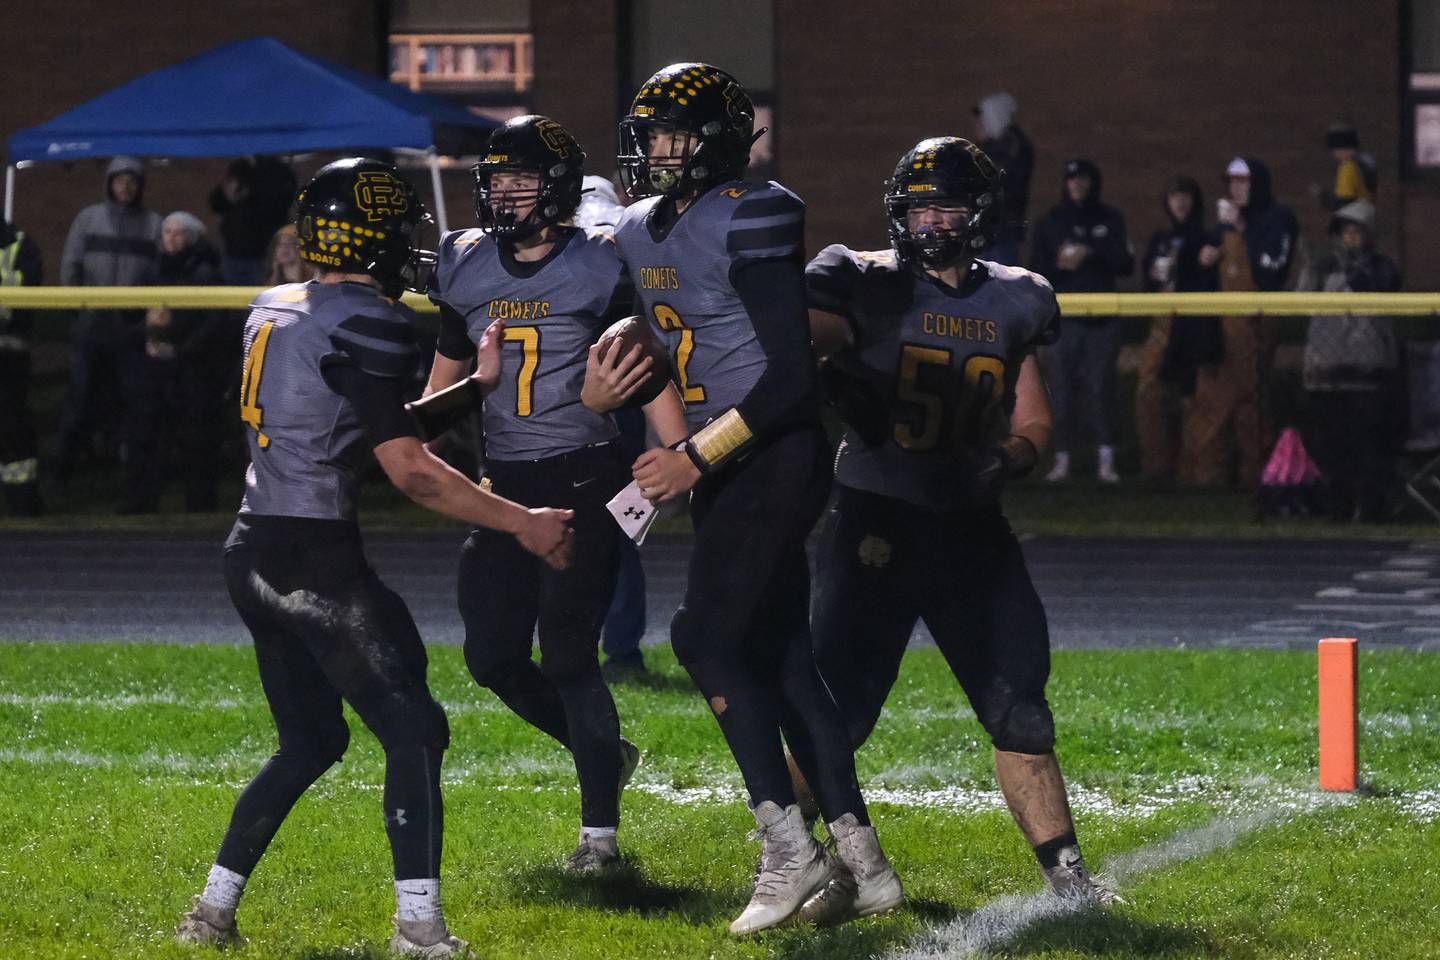 Reed-Custer's Jake McPherson celebrates a touchdown against Peotone in the first round of the Class 3a playoffs at Reed-Custer High School on Friday, Oct. 29, 2021 in Braidwood.